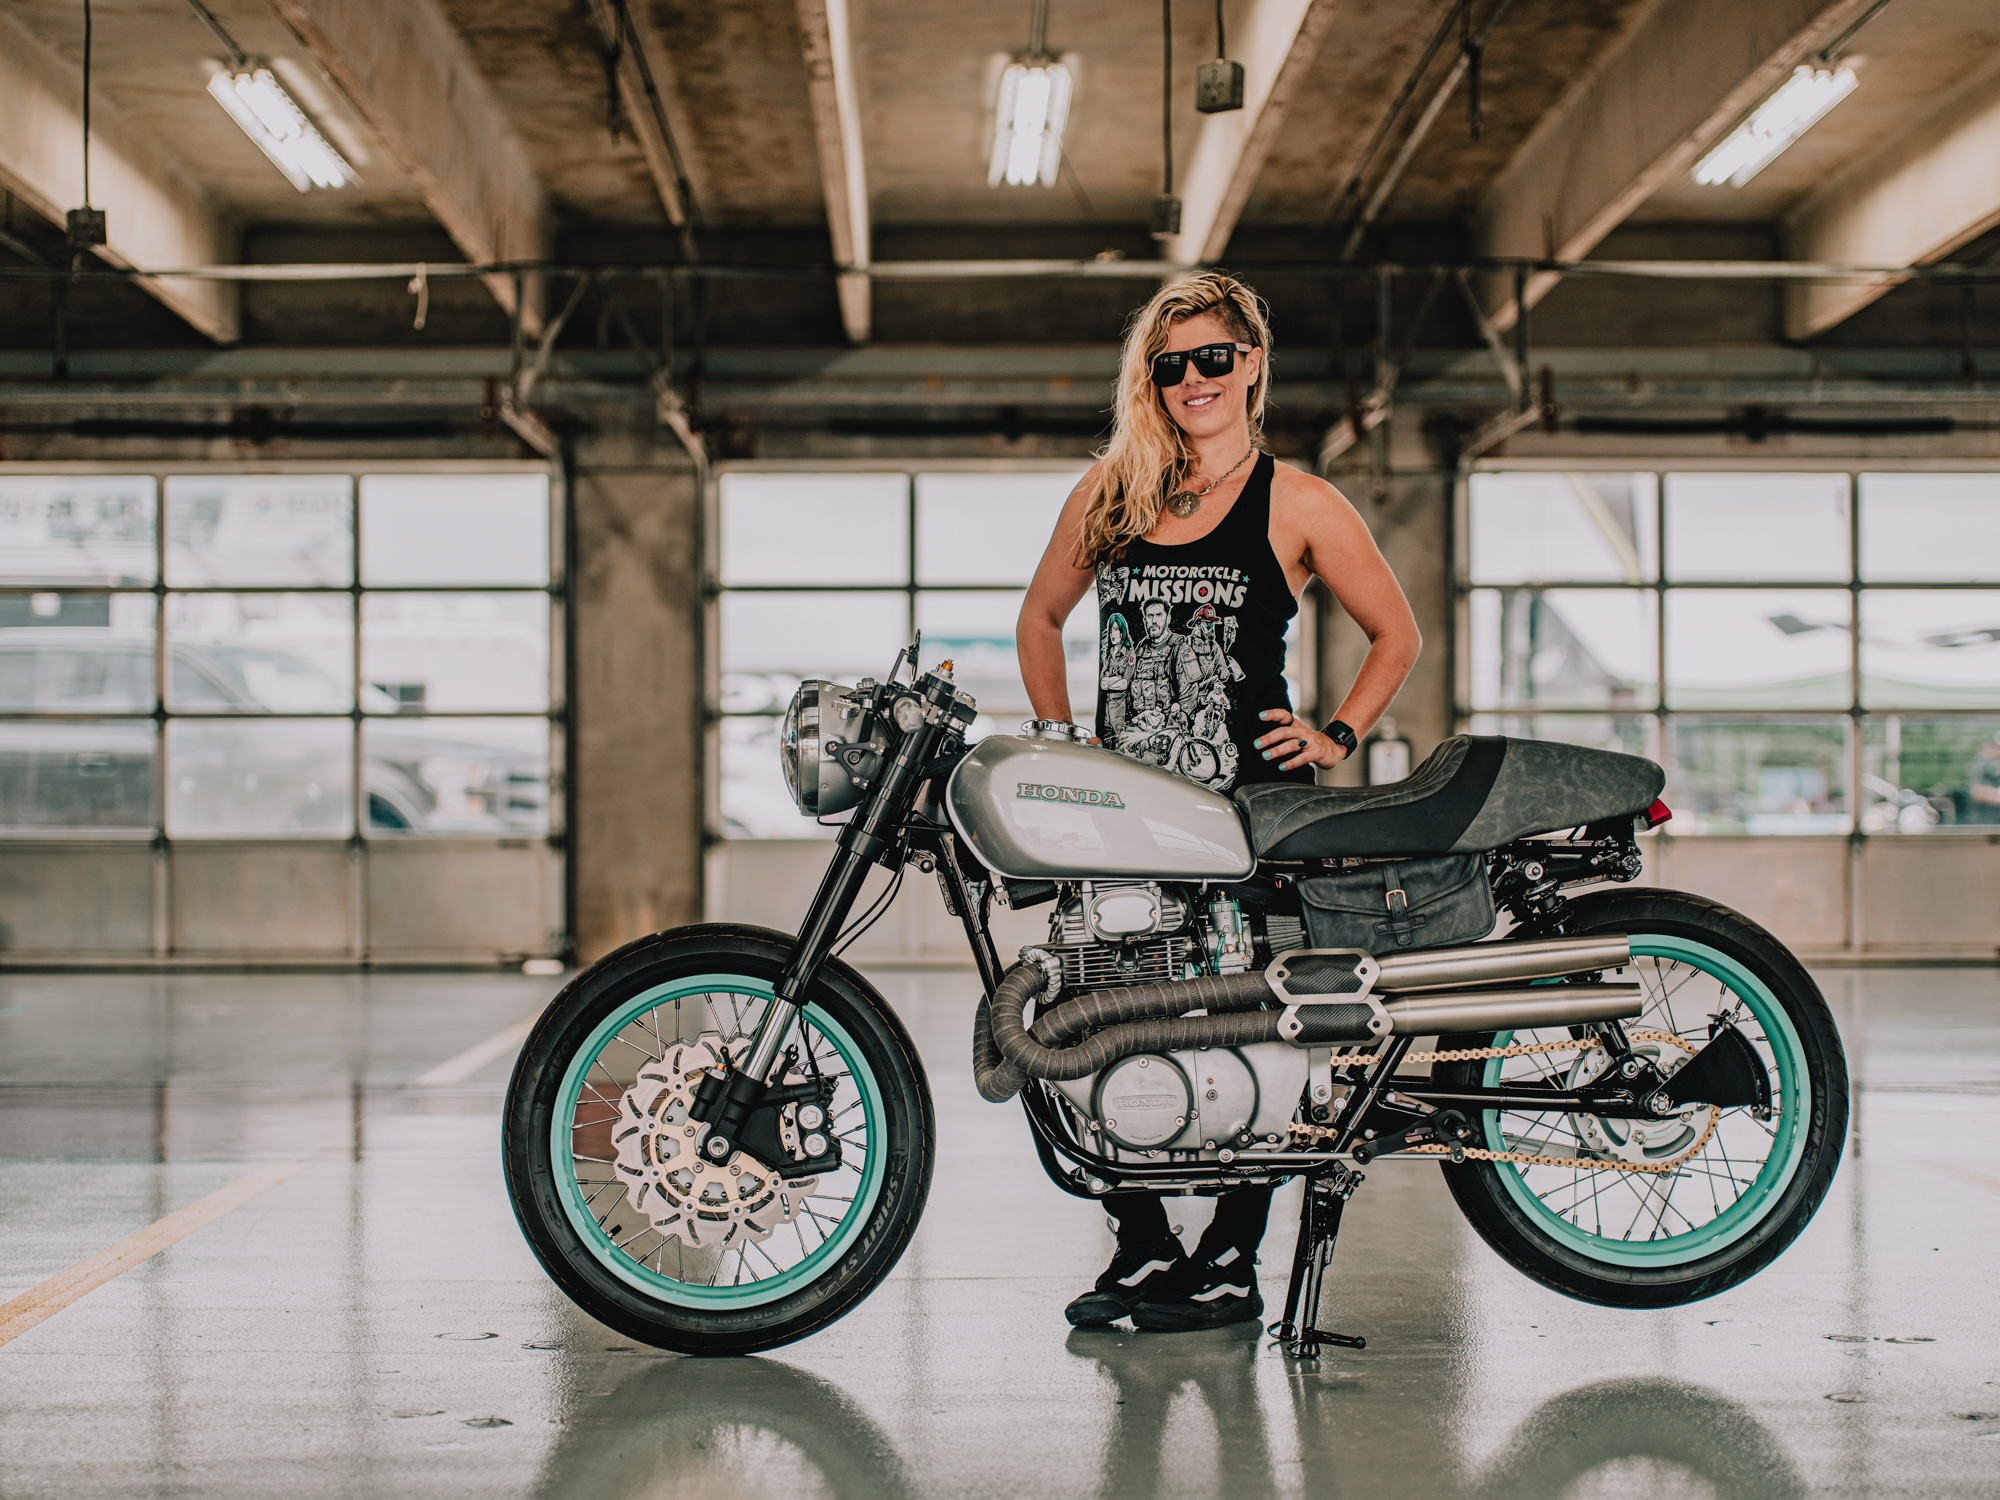 Women's Motorcycle Show - Krystal Hess, founder of Motorcycle Missions